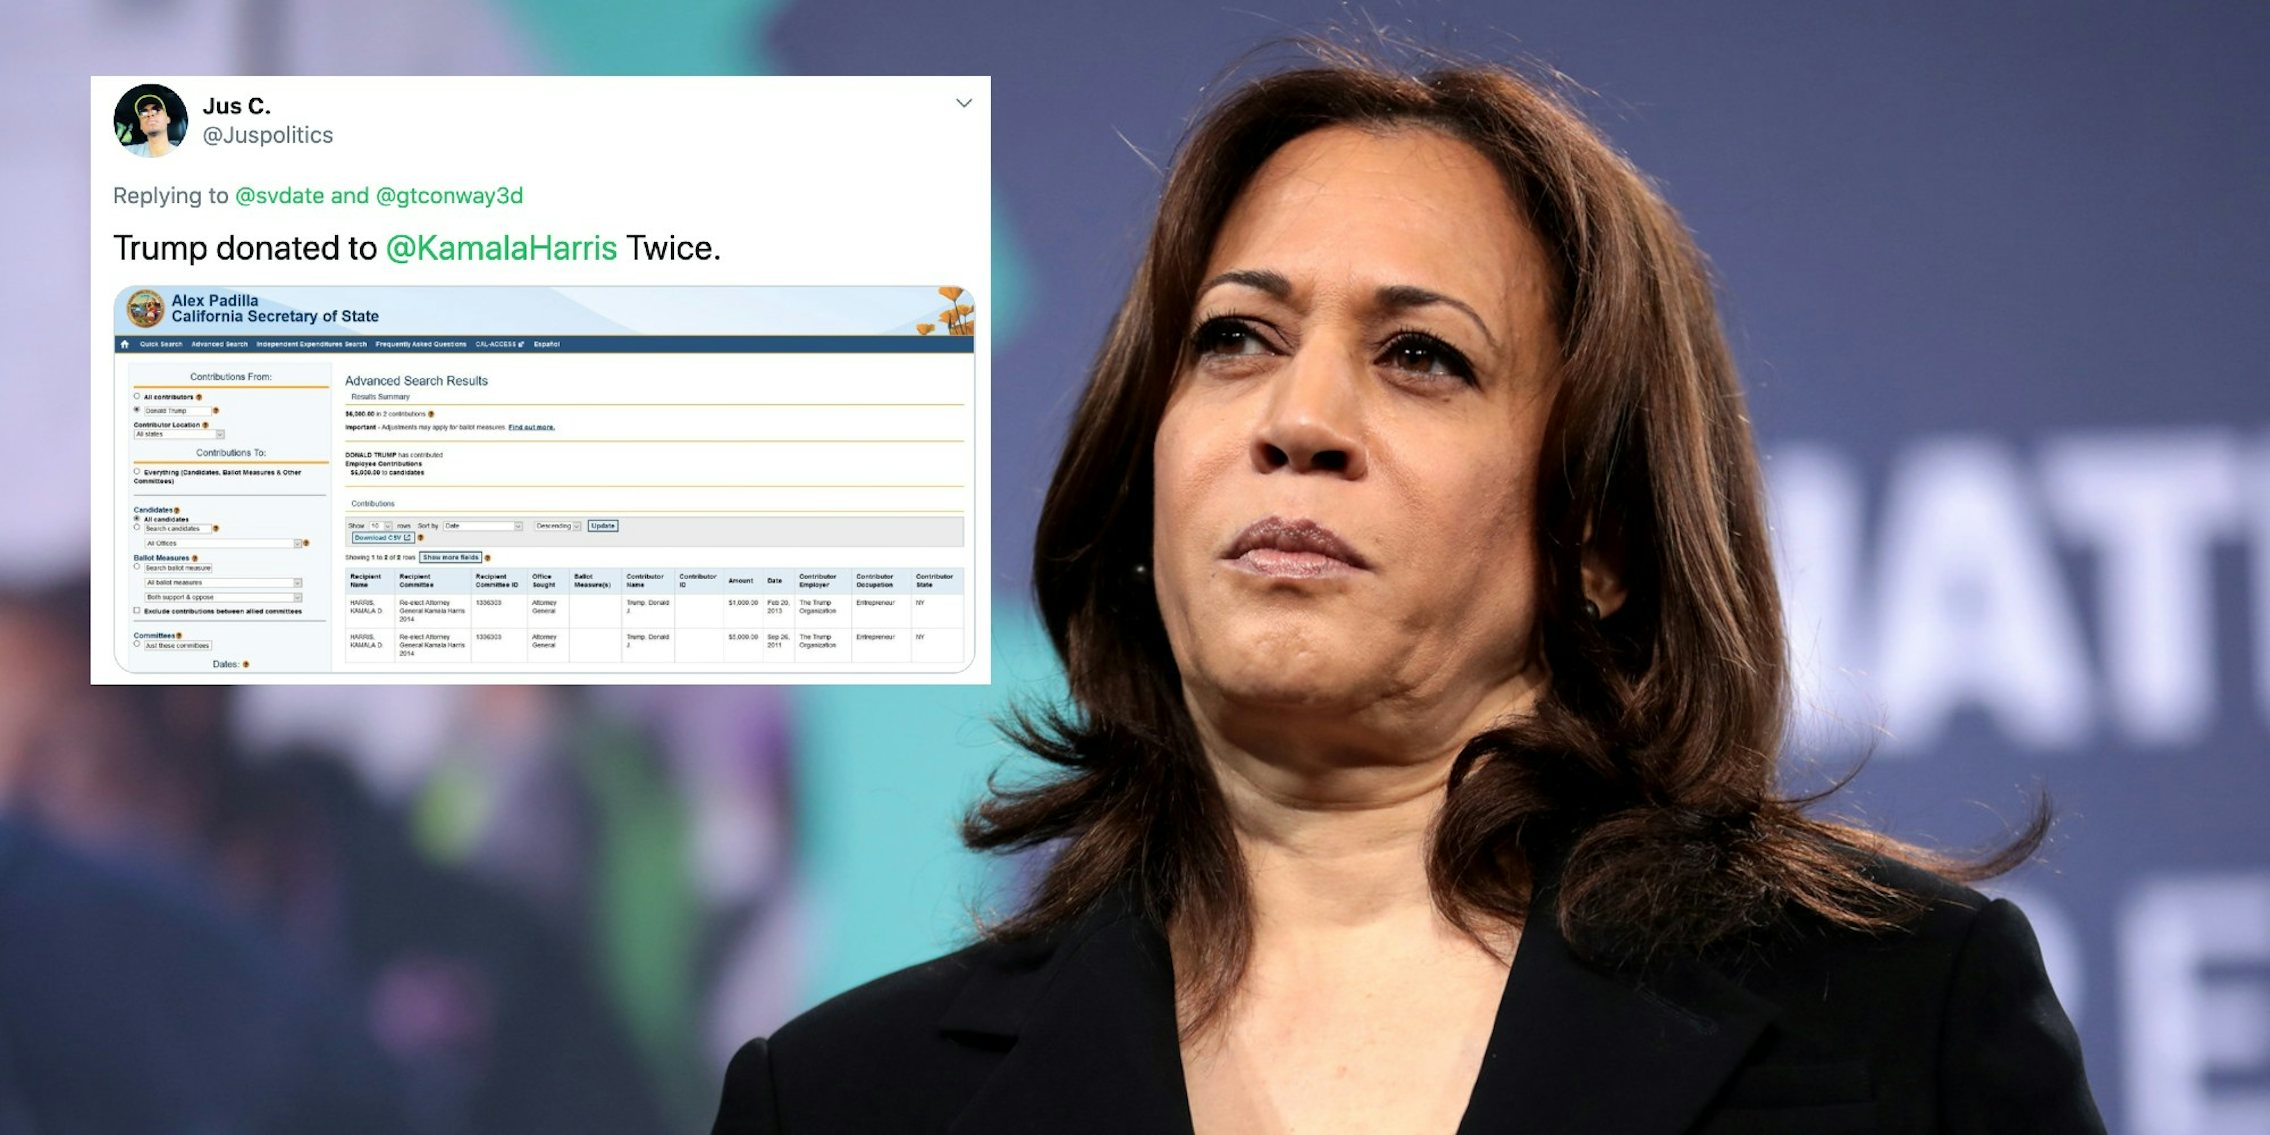 Kamala Harris next to a tweet about donations from Trump